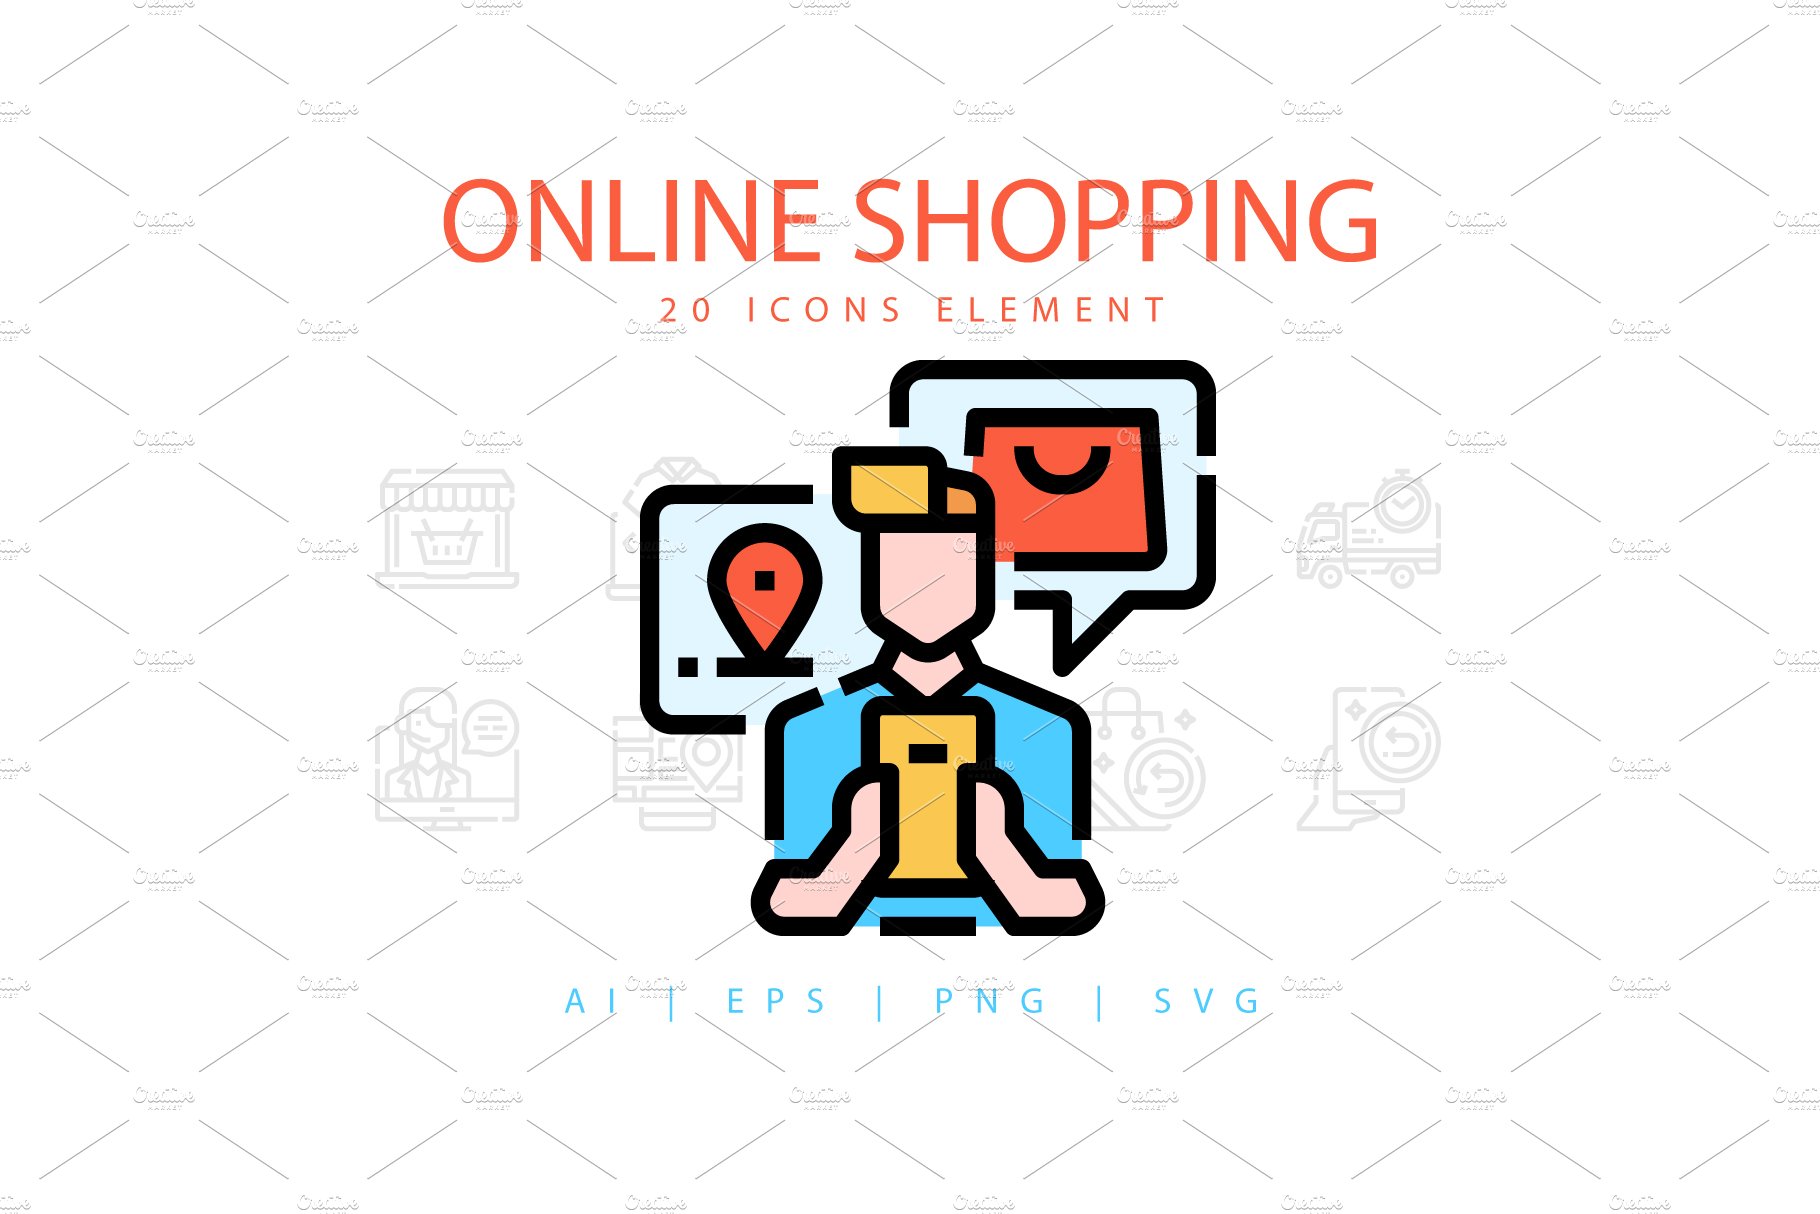 ONLINE SHOPPING ICONS PACKS cover image.